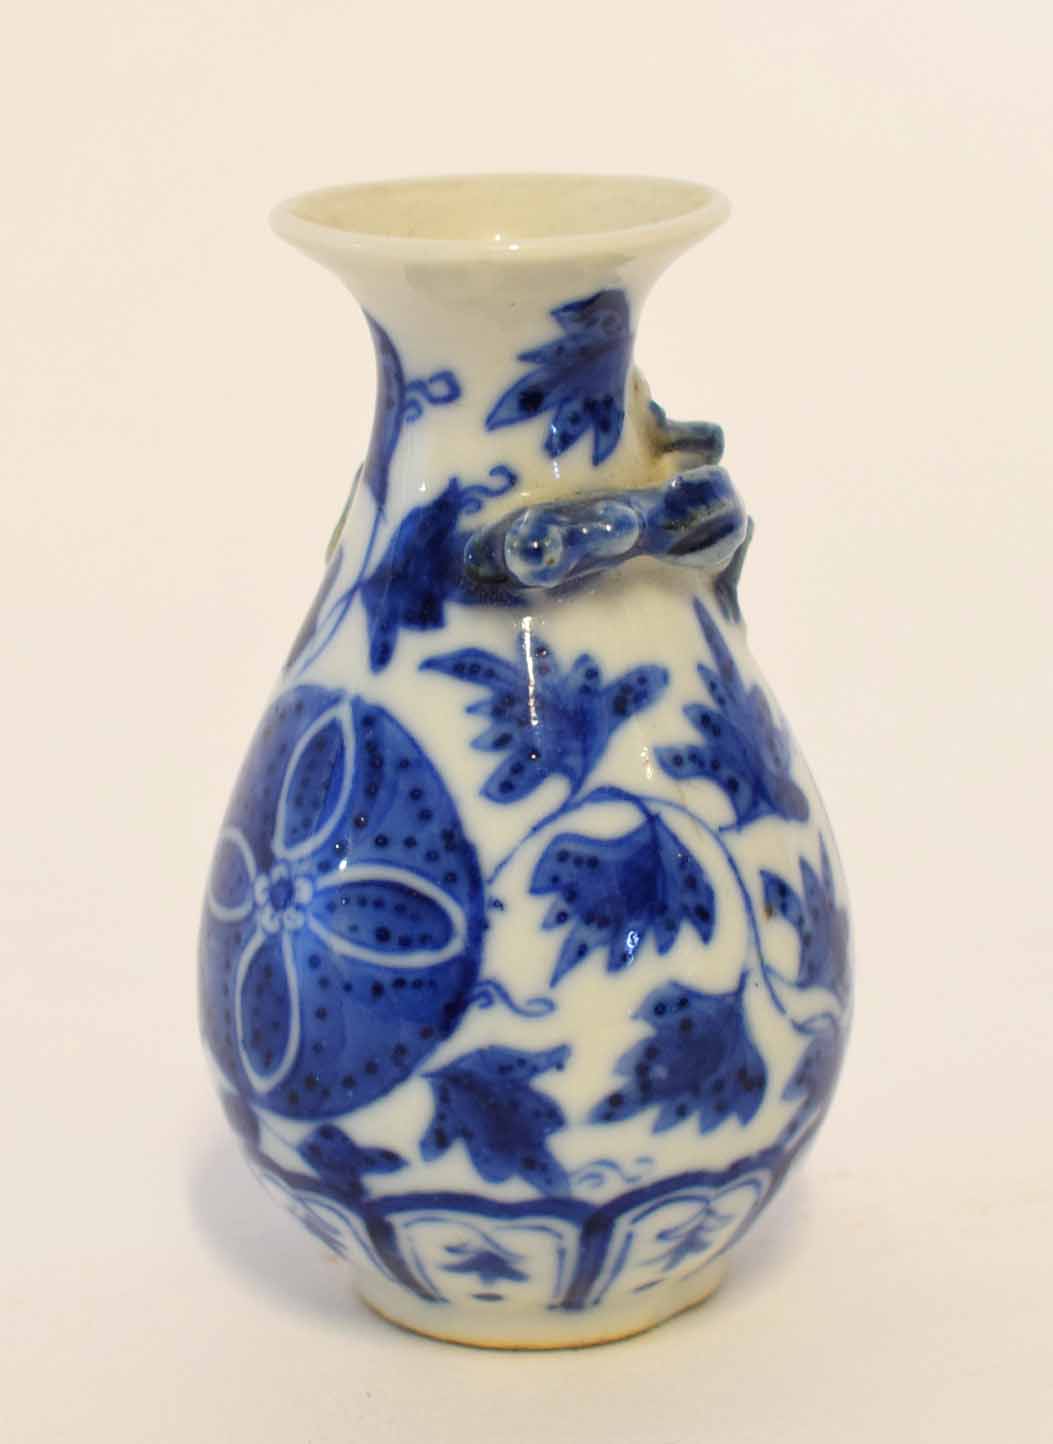 Small Chinese blue and white vase moulded with a lizard encircling the neck, 12cm high